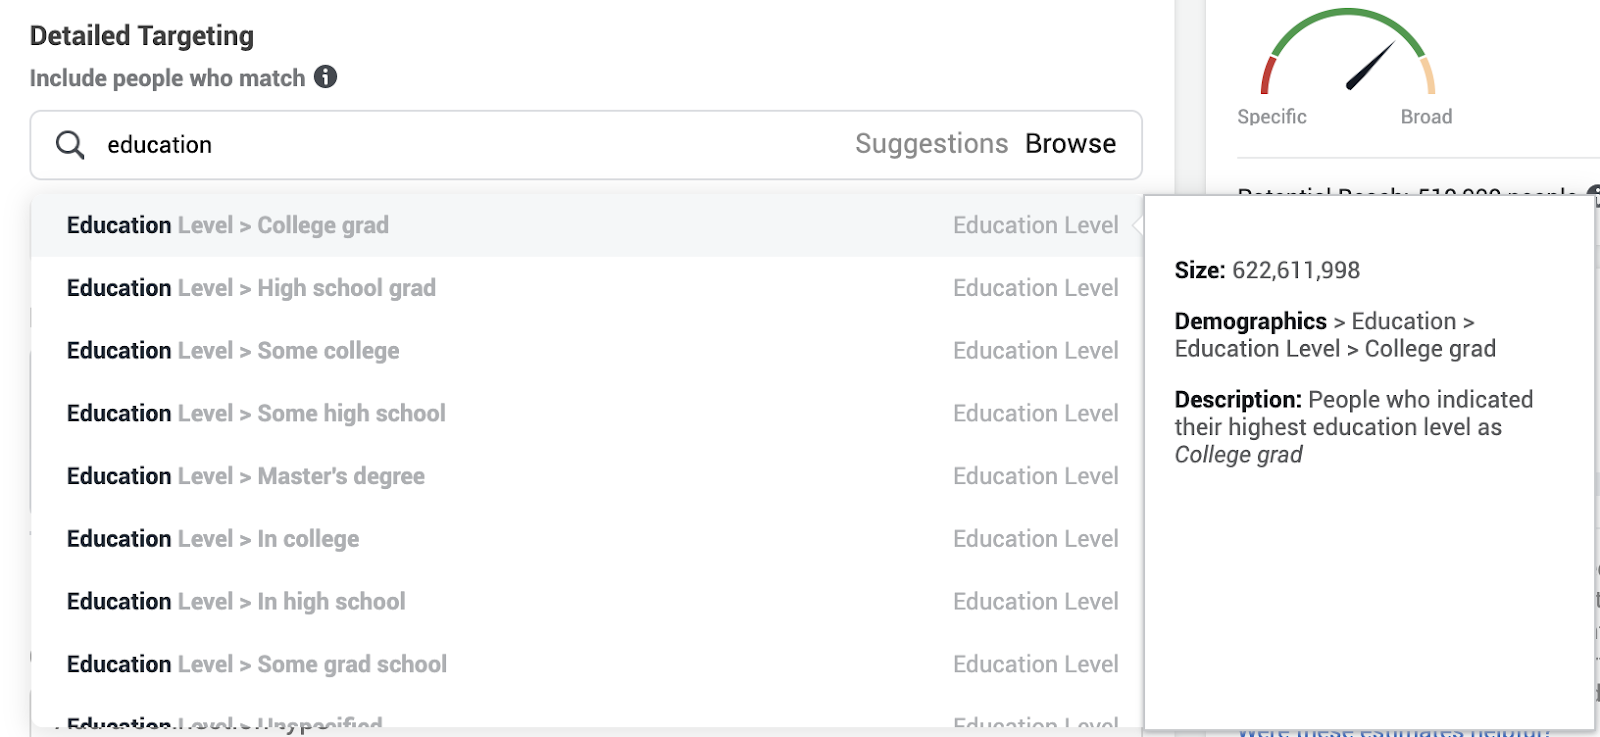 Search under “Education Level”